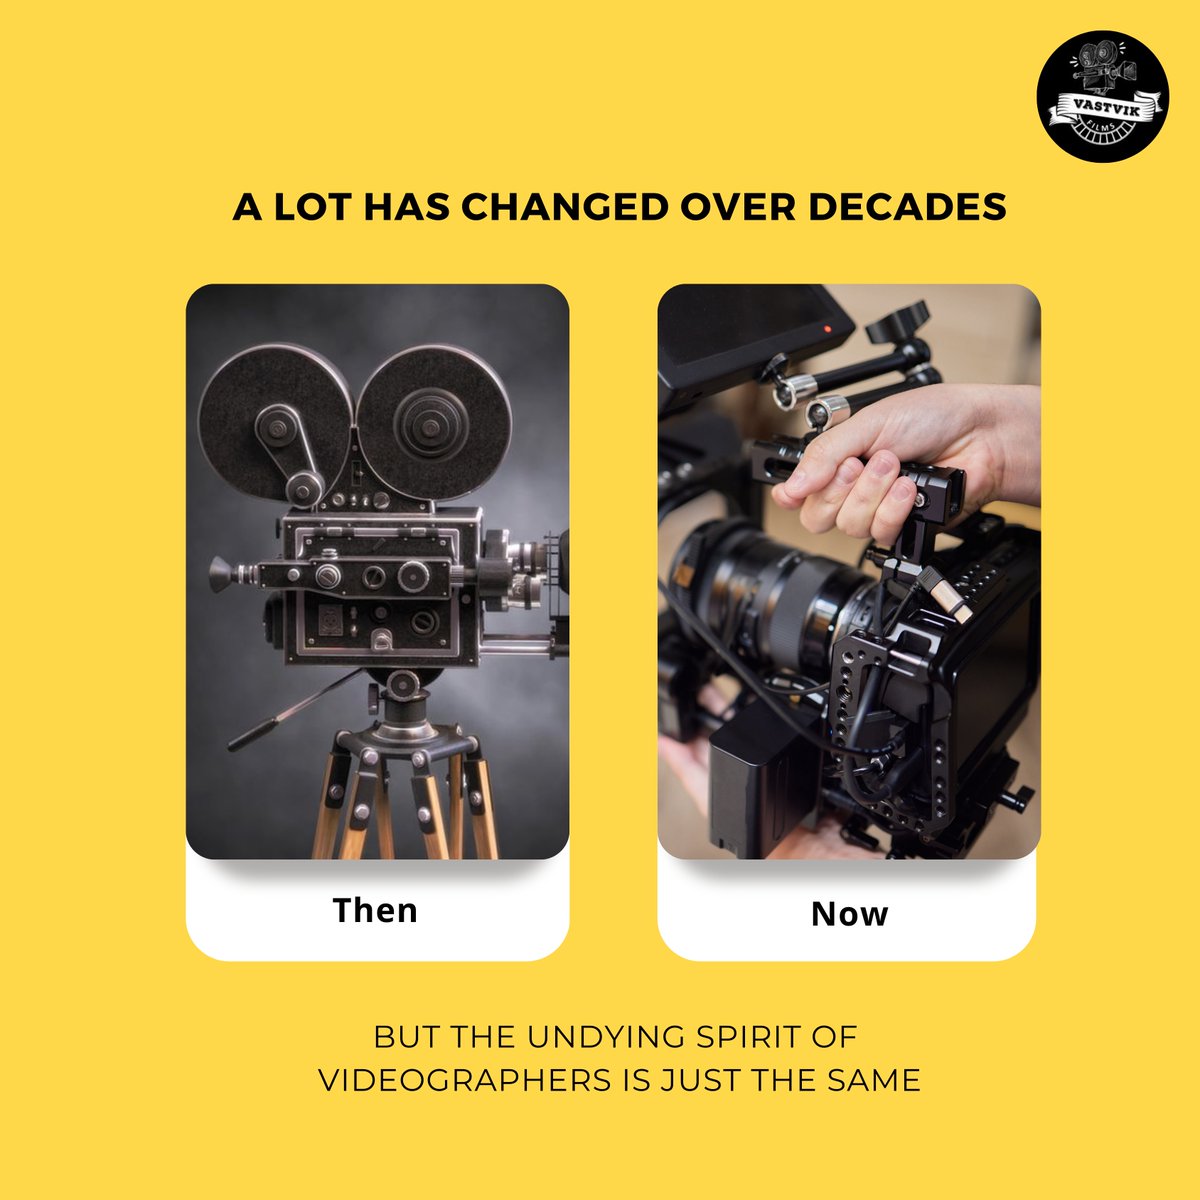 Videographers are insane as always, and that takes them from average to WOW. We are as crazy, and proud of our passion!

#videoproduction #brandvideos #Ads #Adagency #filmmaking #shortvideos #vastvikfilms #vastvision #videoproductionhouseinmumbai #videoproductioncompany